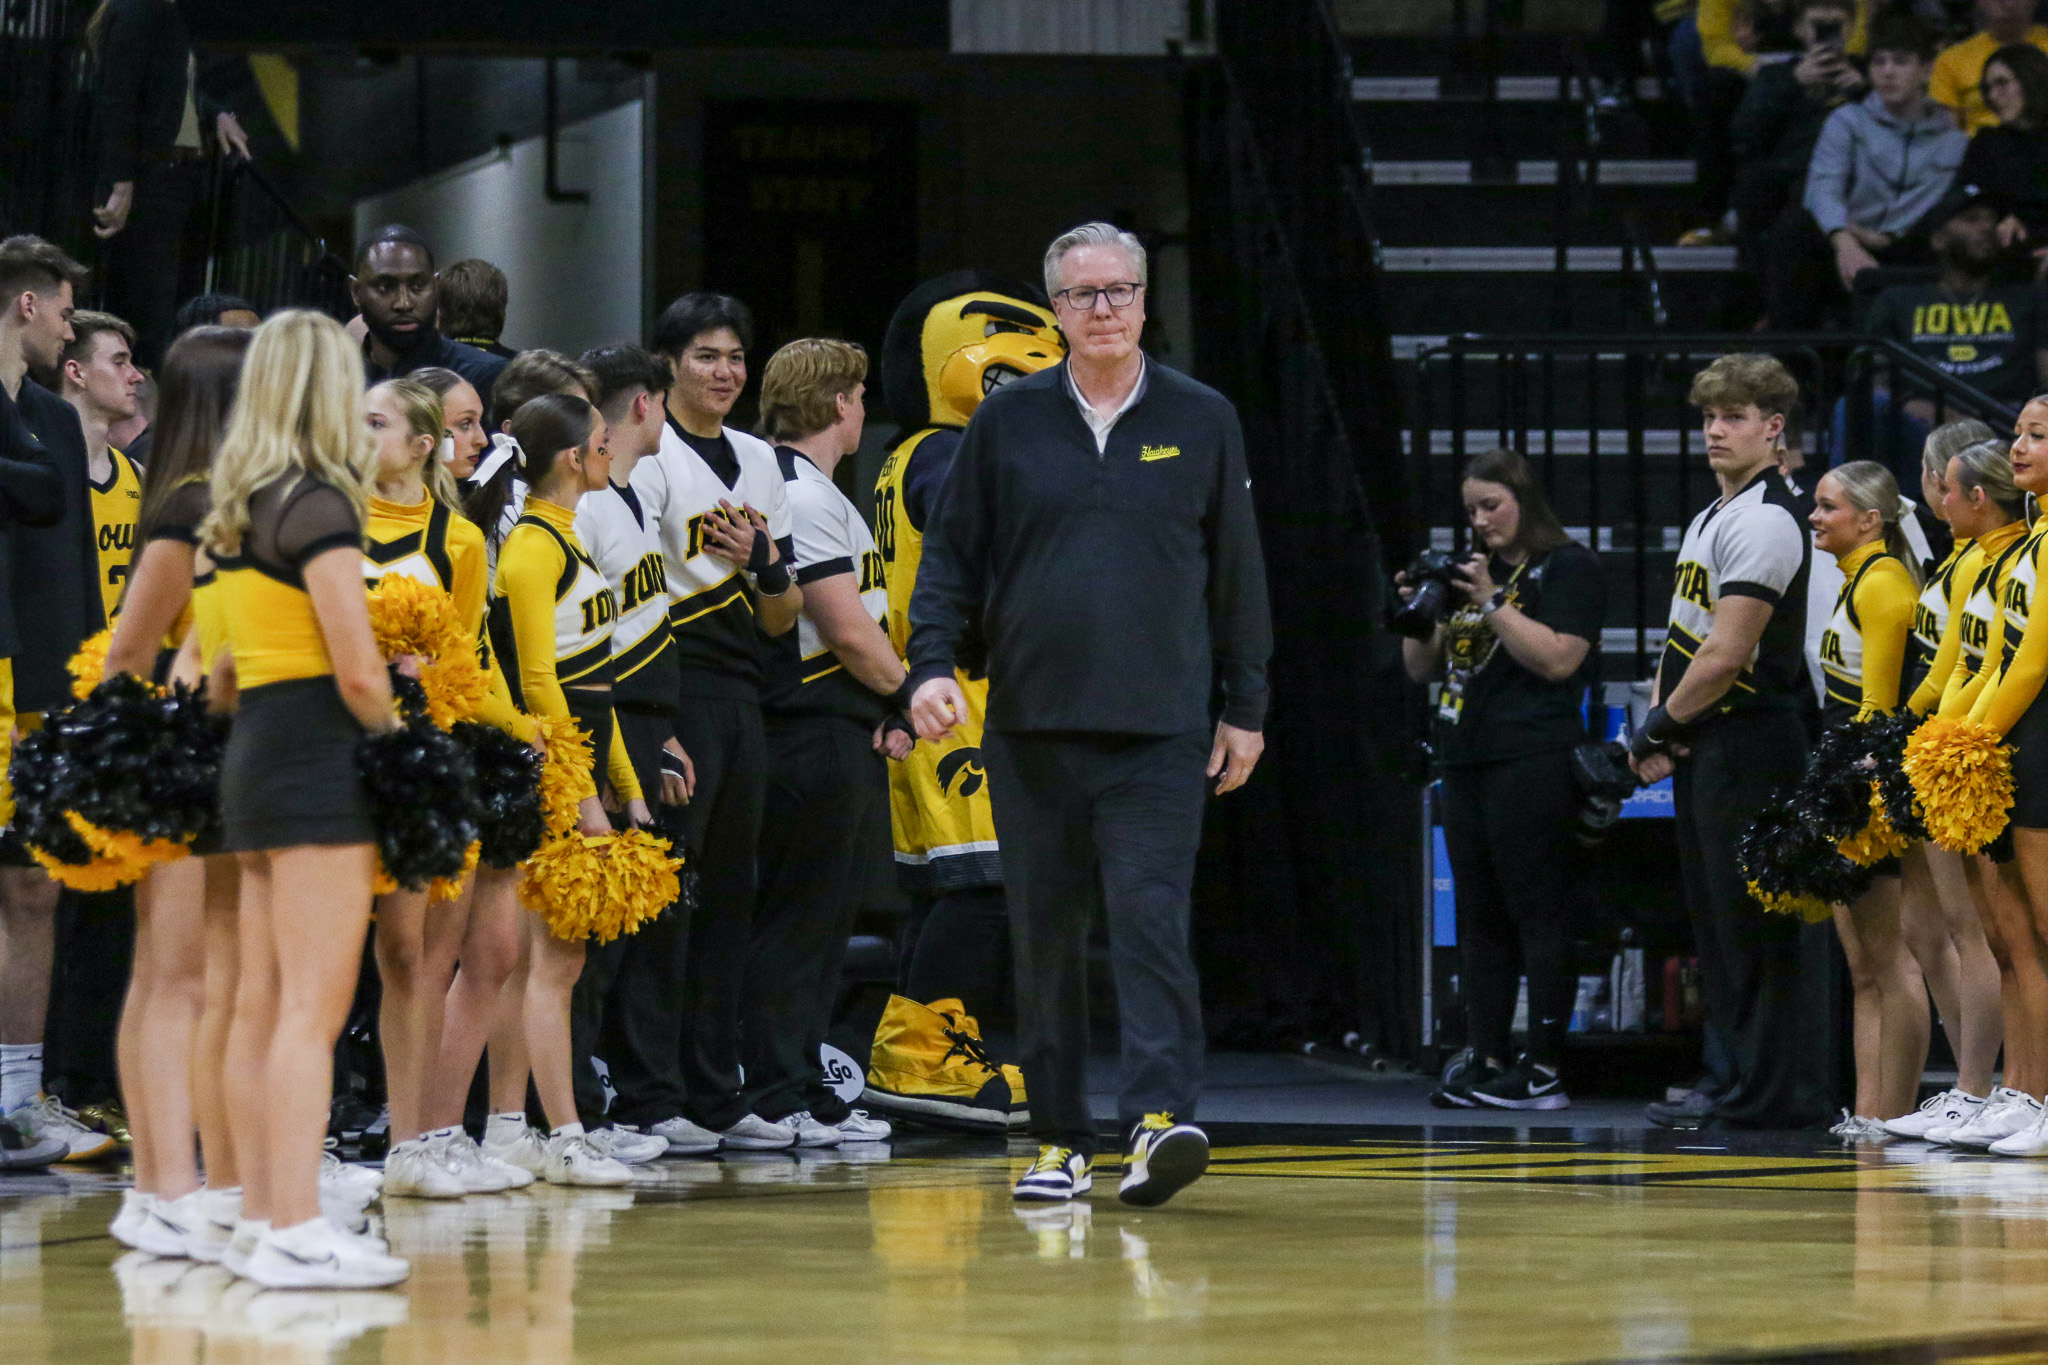 Iowa coach Fran McCaffery walks onto the court during Senior Day ceremonies before a game against Illinois on March 10, 2024 at Carver-Hawkeye Arena in Iowa City, Iowa. (Rob Howe/HN)